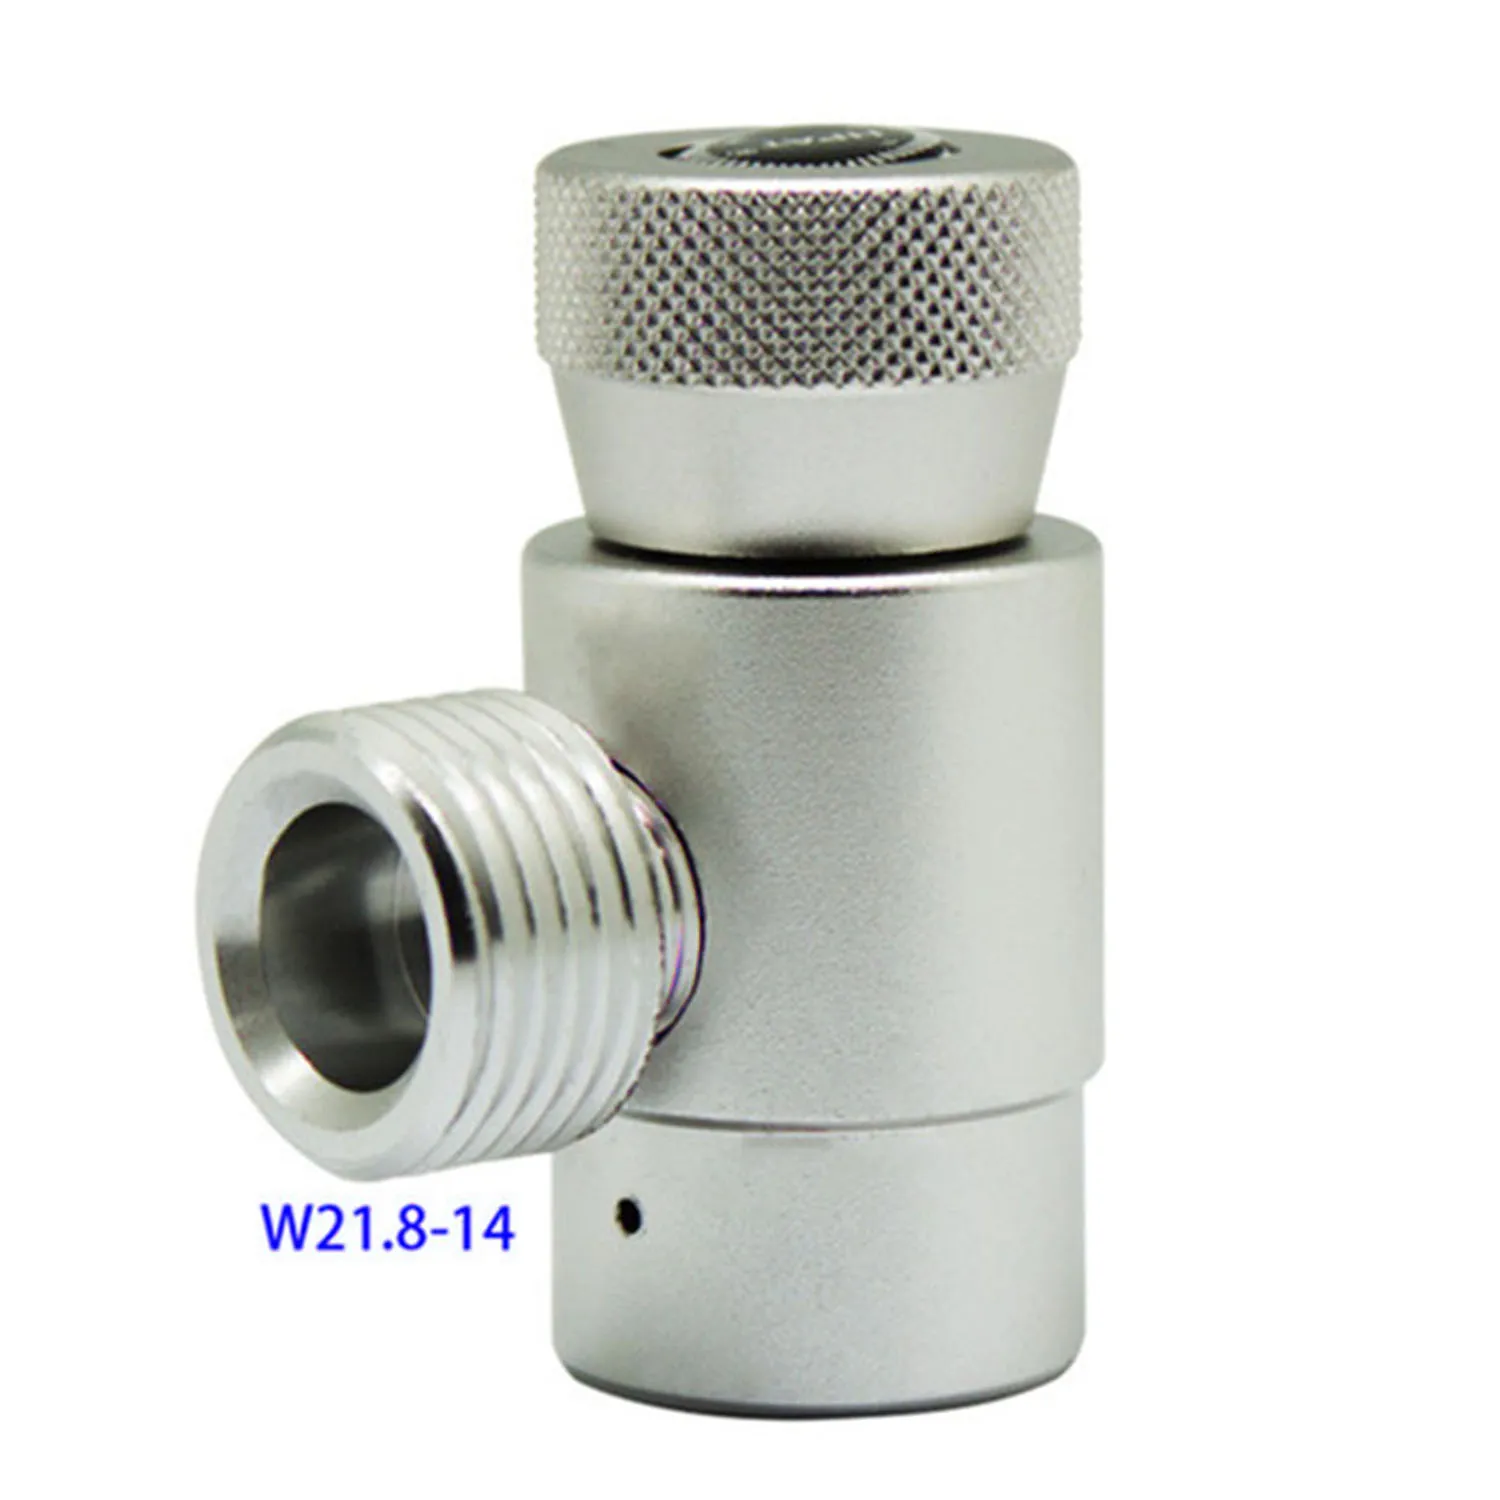 

CO2 Filling Refill Adapter Metal Connector W21.8 -14 To TR21-4 For Soda-Maker Cylinder Tank Gas Homebrew Regulator Barware Part